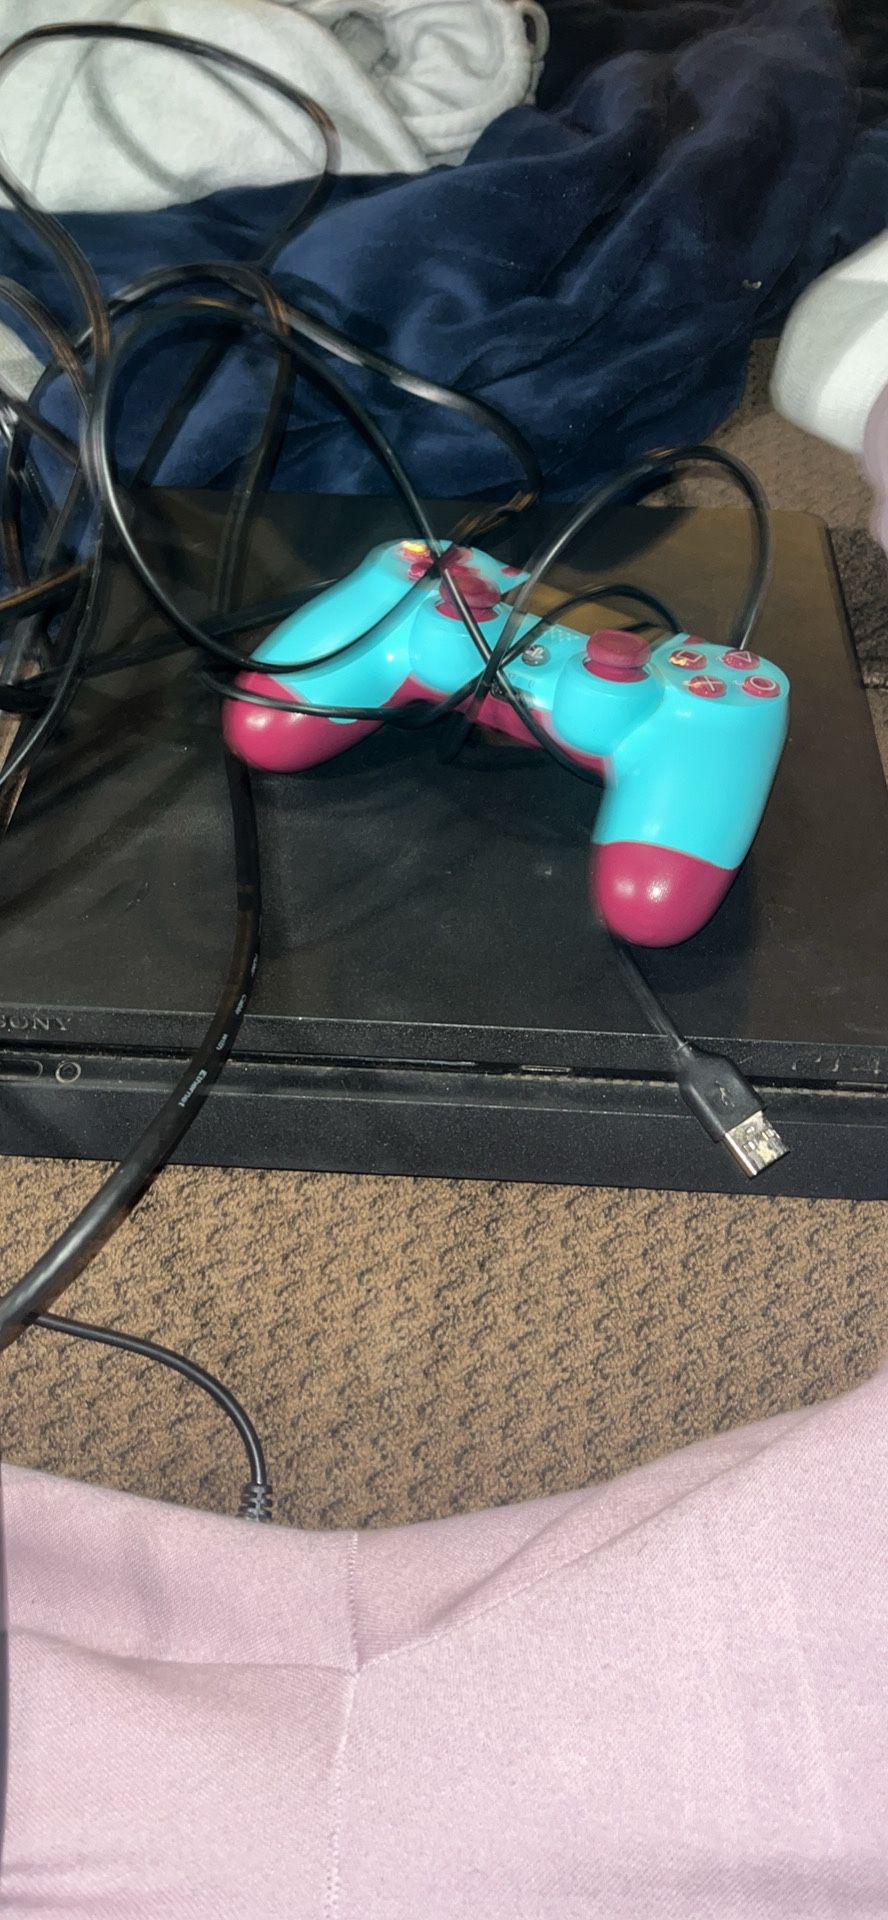 PS4 With Custom Controller 